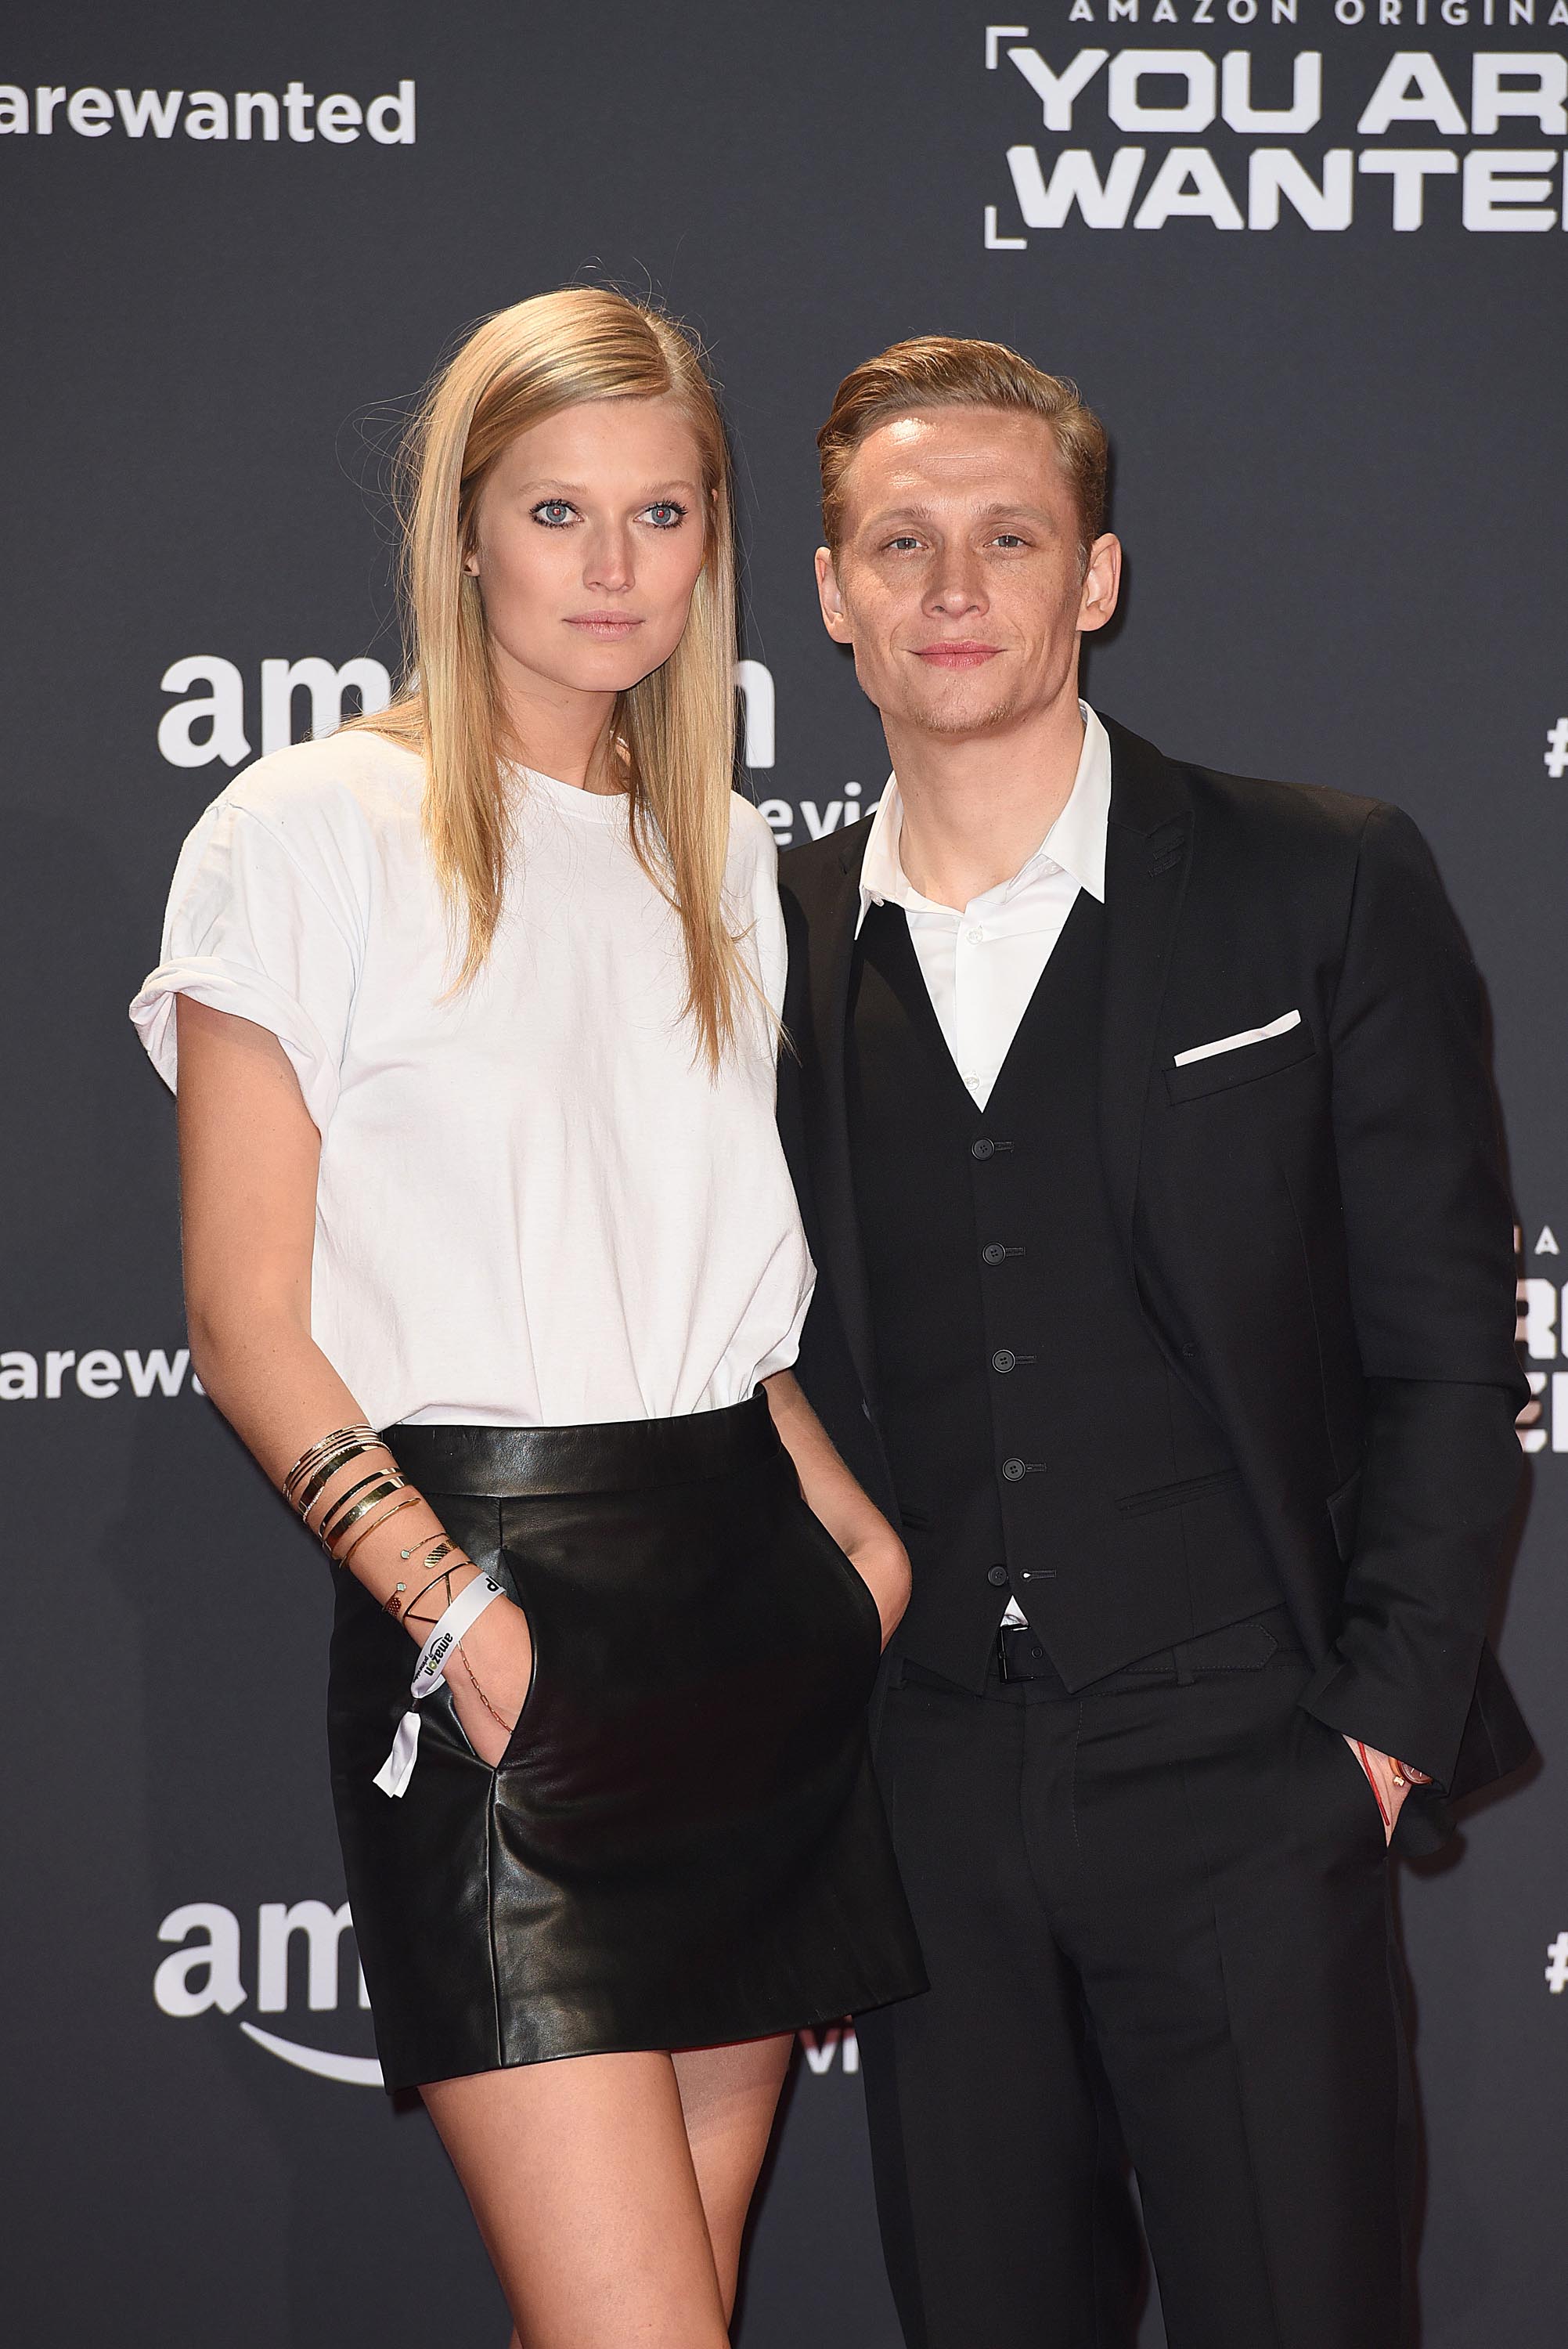 Toni Garrn arrives at Amazon Prime Video’s premiere of the series ‘You are Wanted’